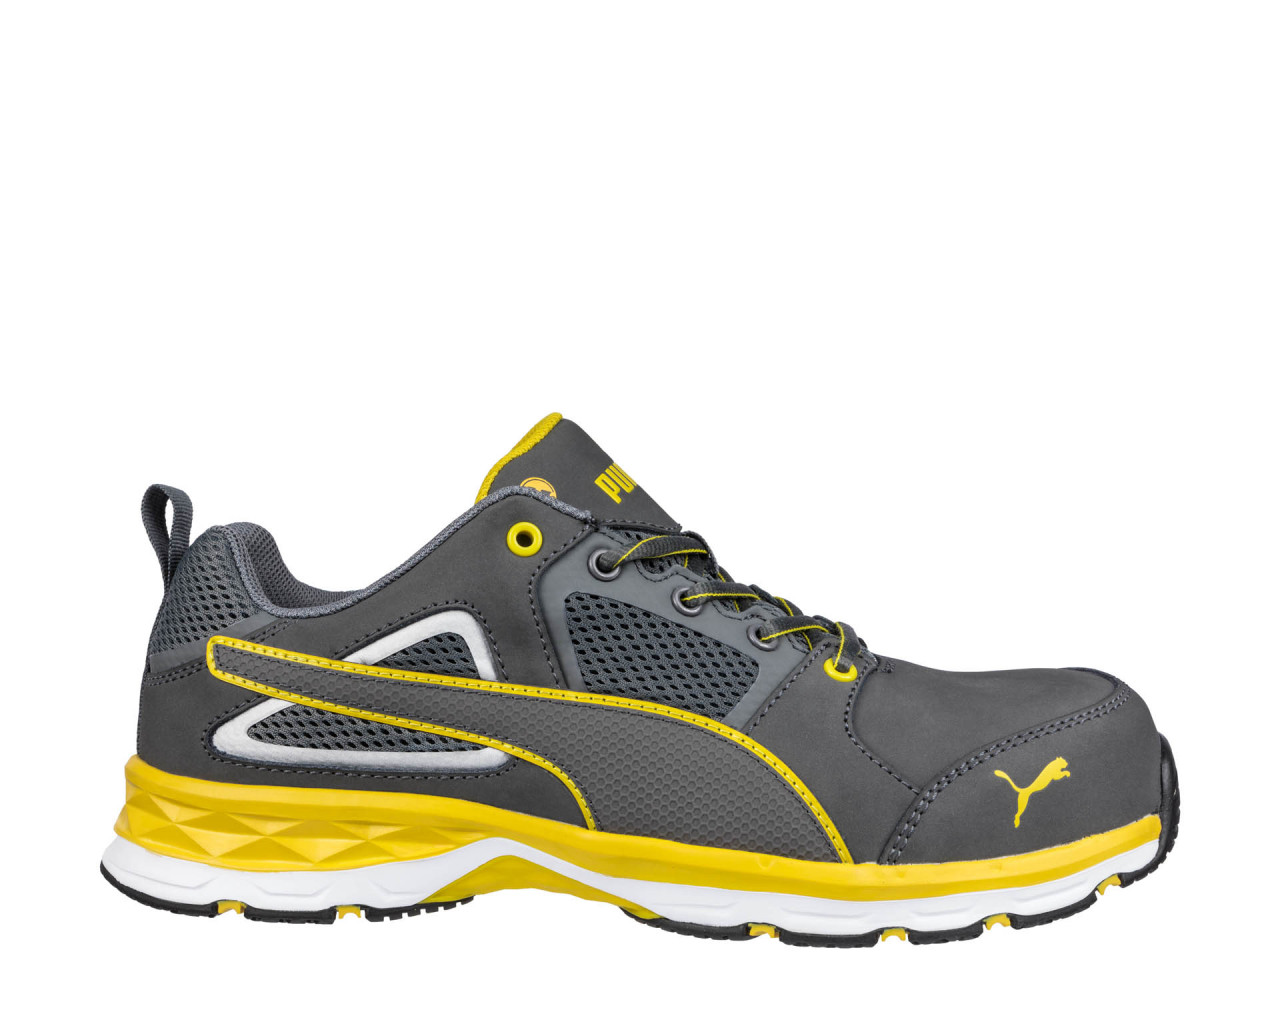 PUMA SAFETY safety S1P LOW YELLOW ESD 2.0 | Safety shoes HRO Puma SRC PACE English